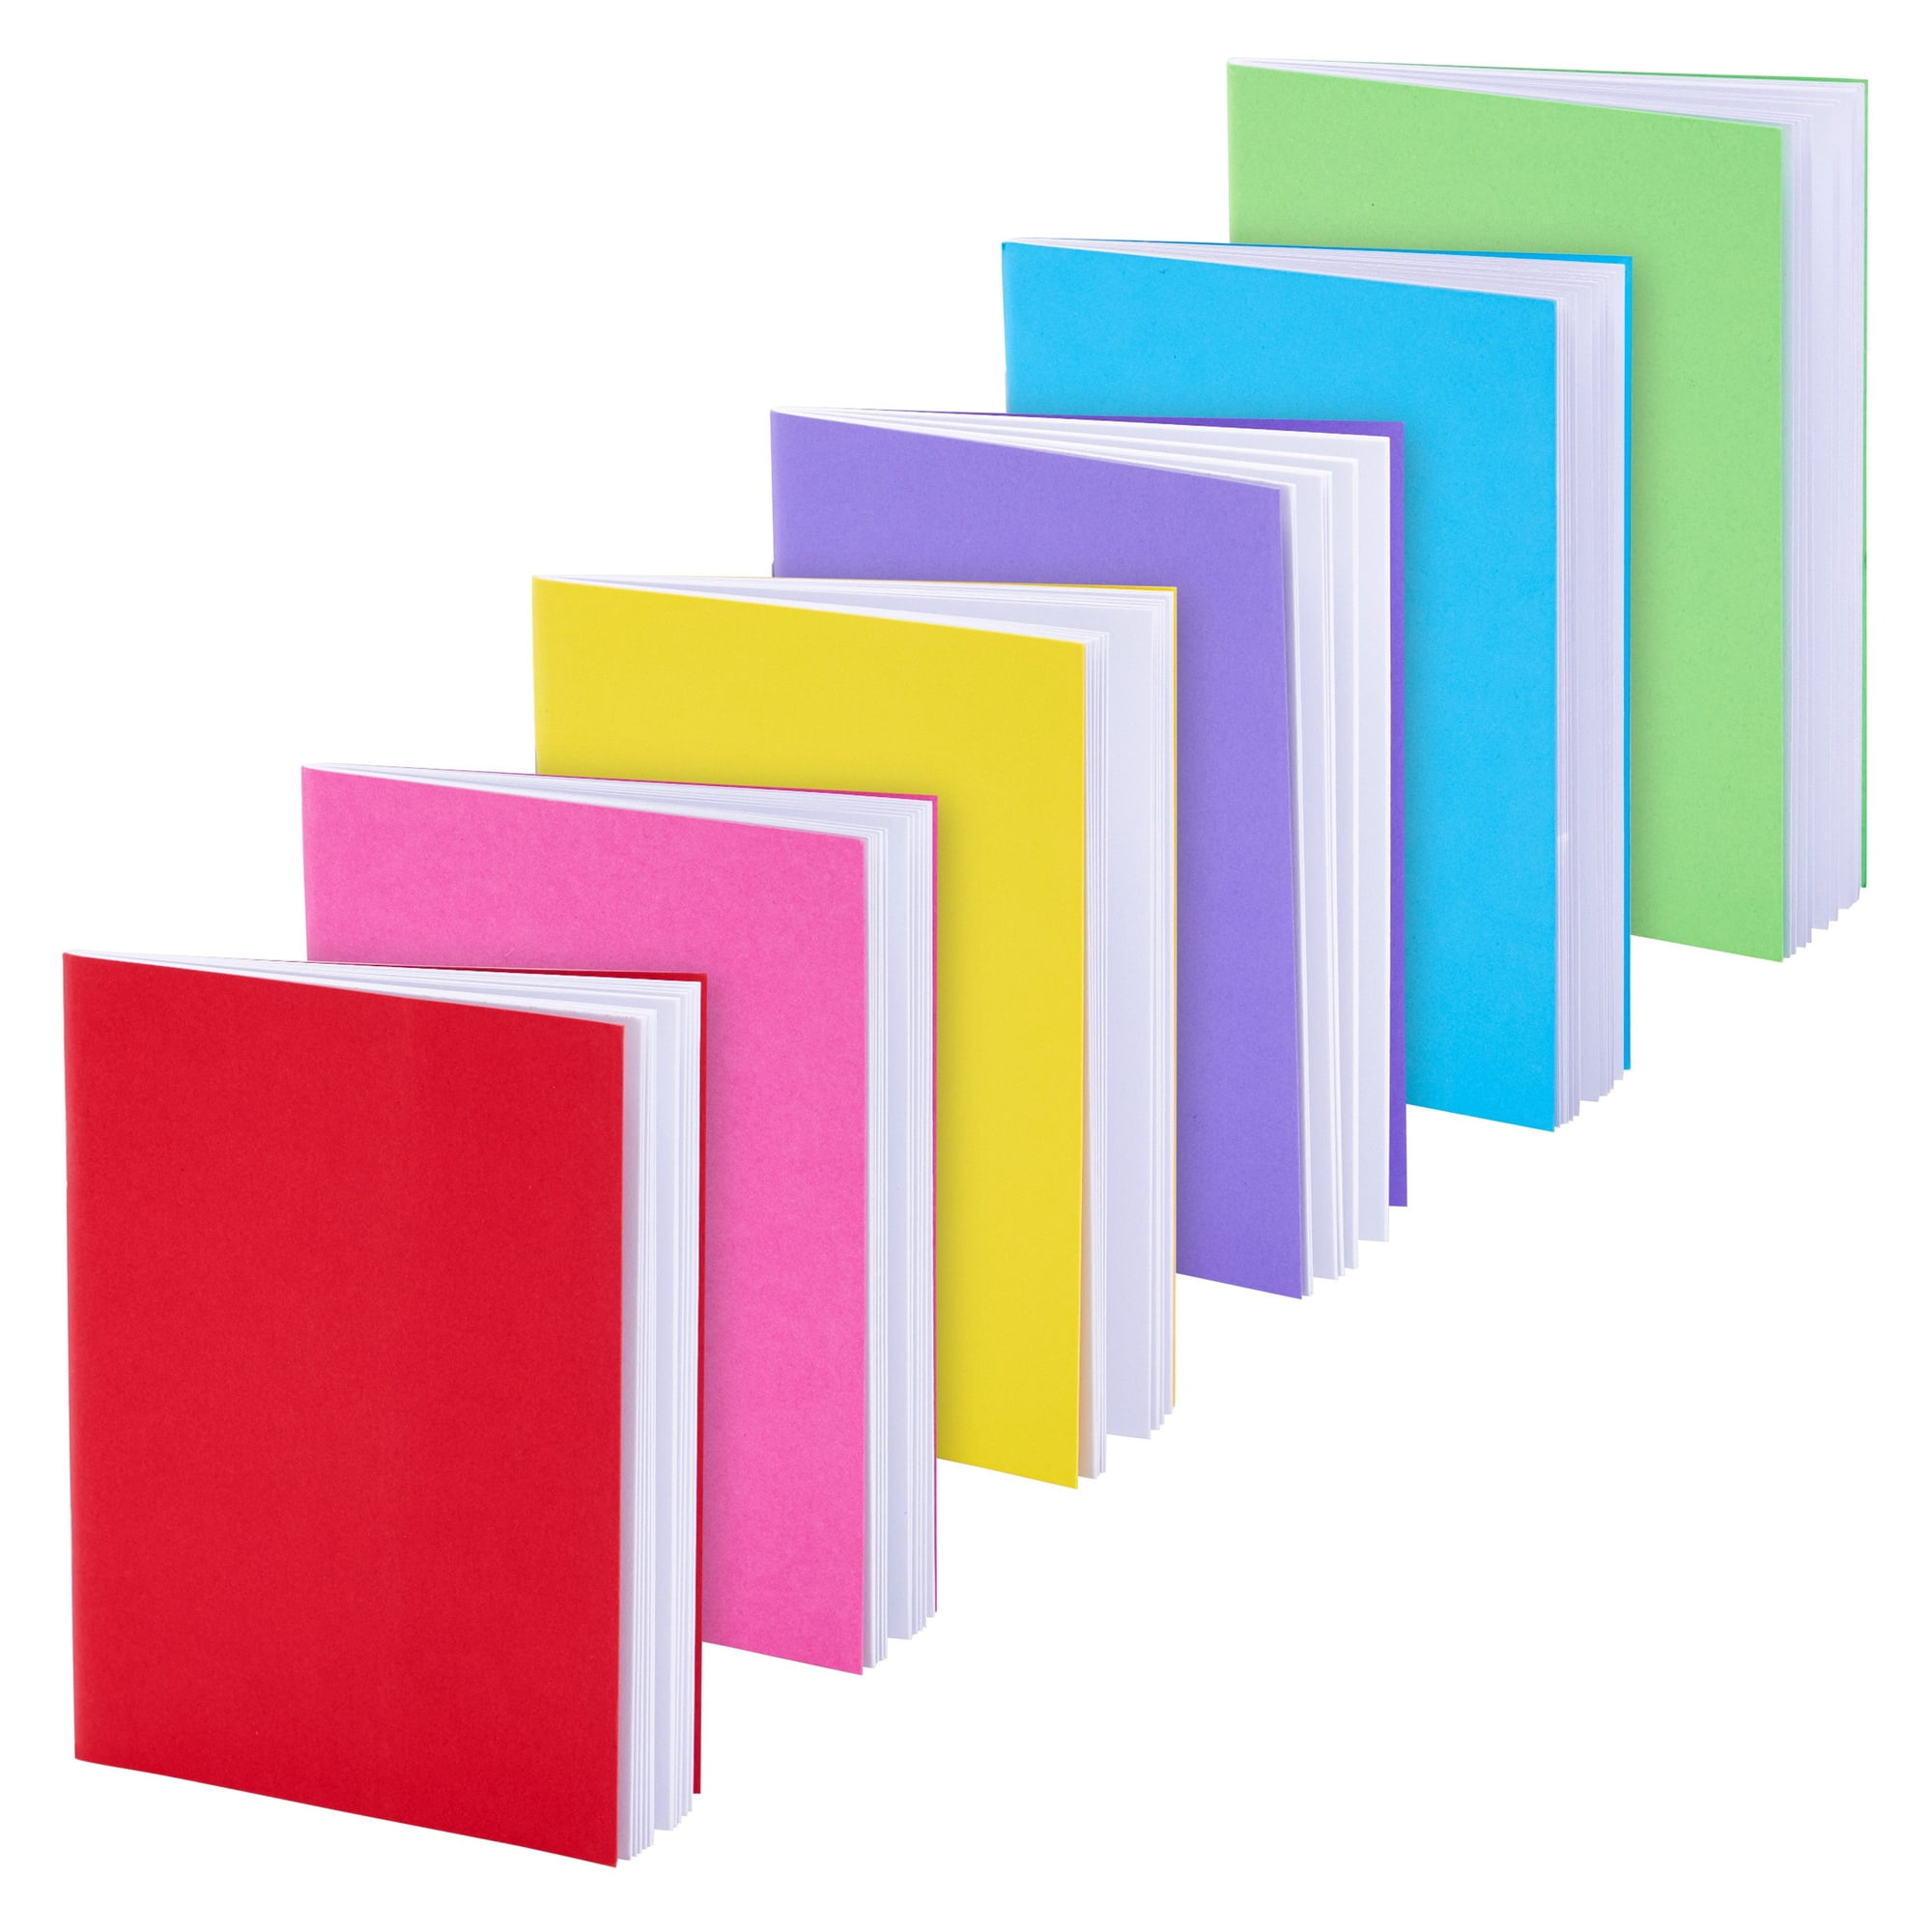 24 Pack Blank Books for Kids to Write Stories, Unlined Journals for Students, Teachers, White, 4.3 x 5.5 in